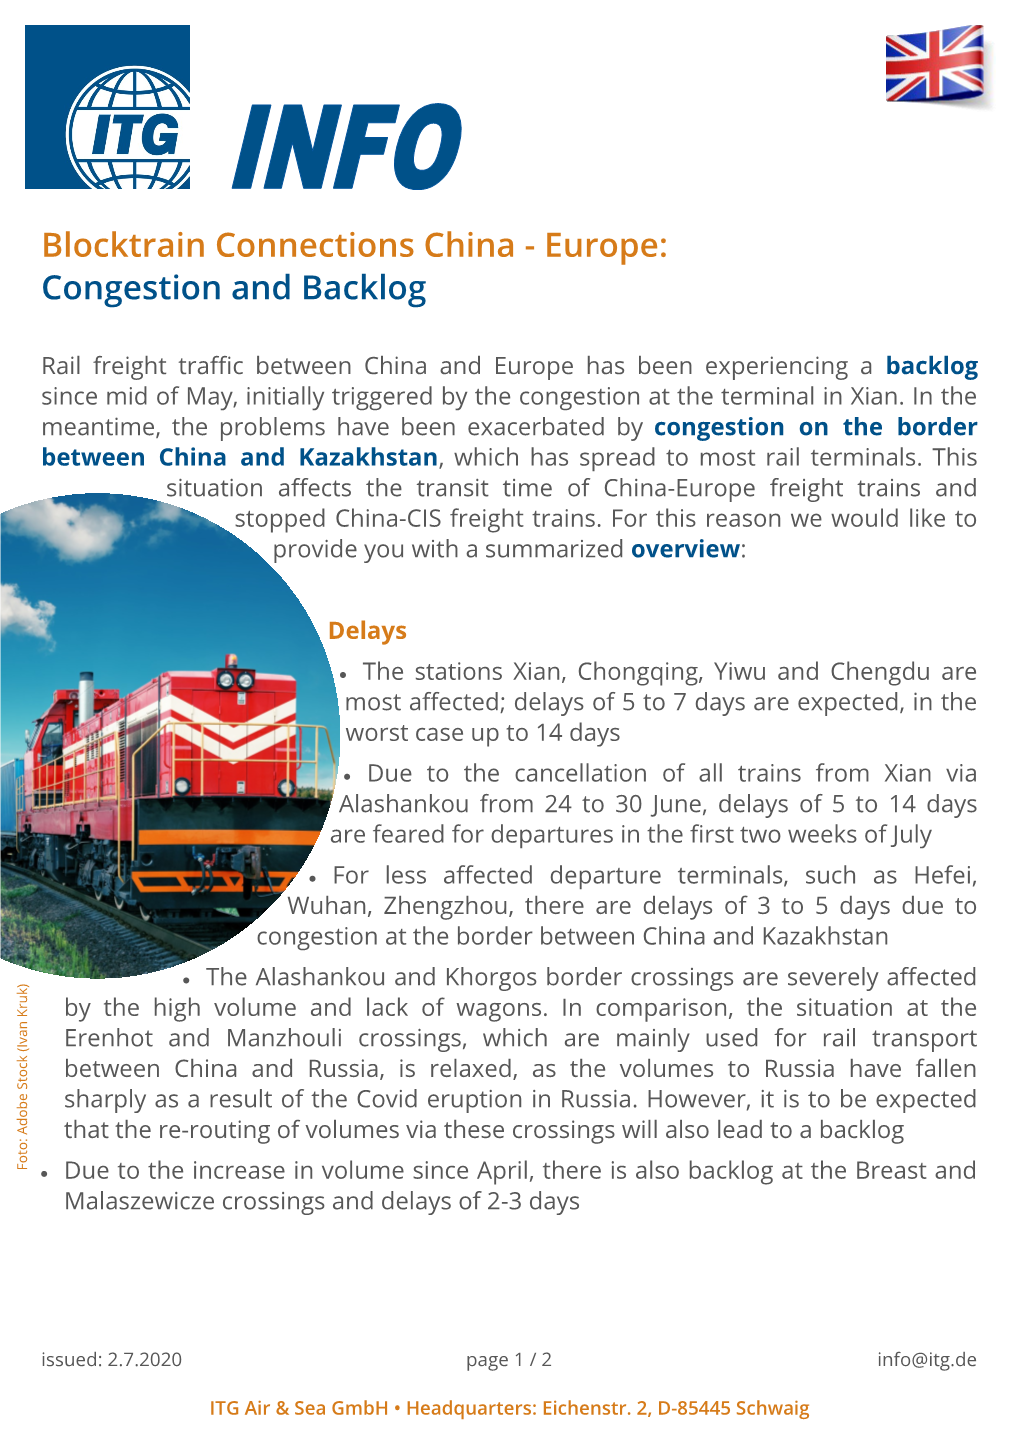 Blocktrain Connections China - Europe: Congestion and Backlog